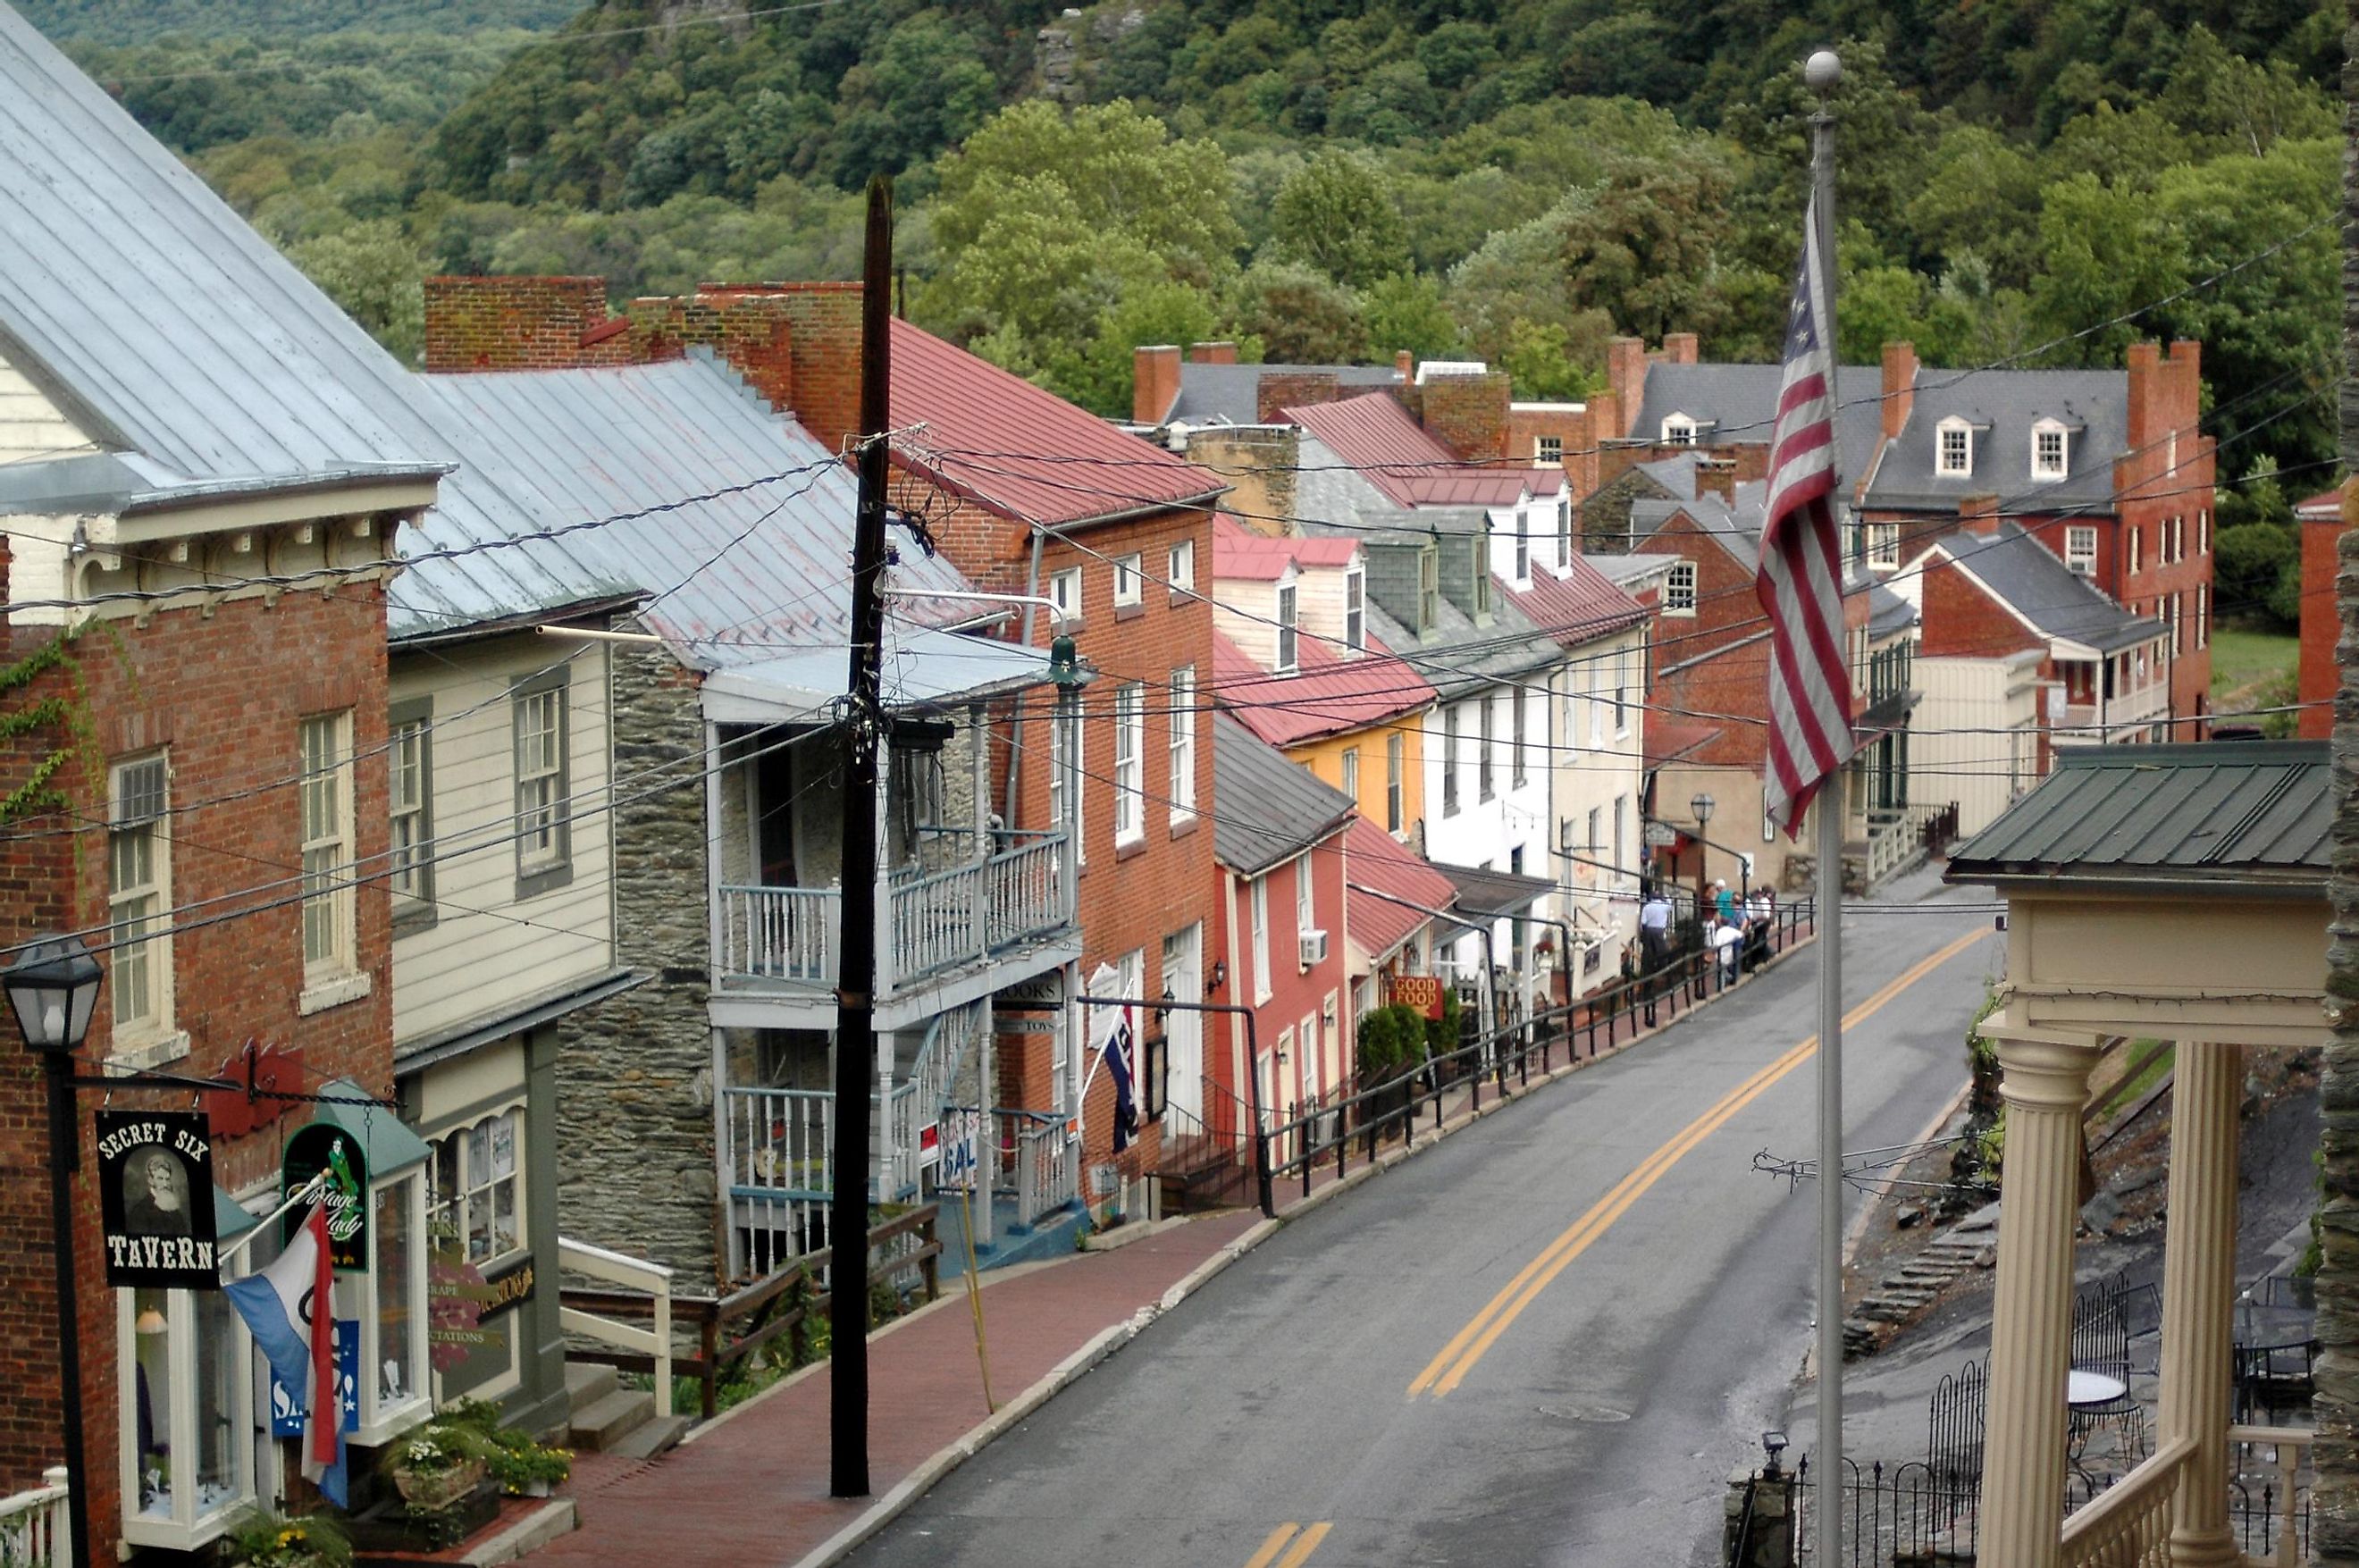 The view from up high of Harper's Ferry, West Virginia's main drag.